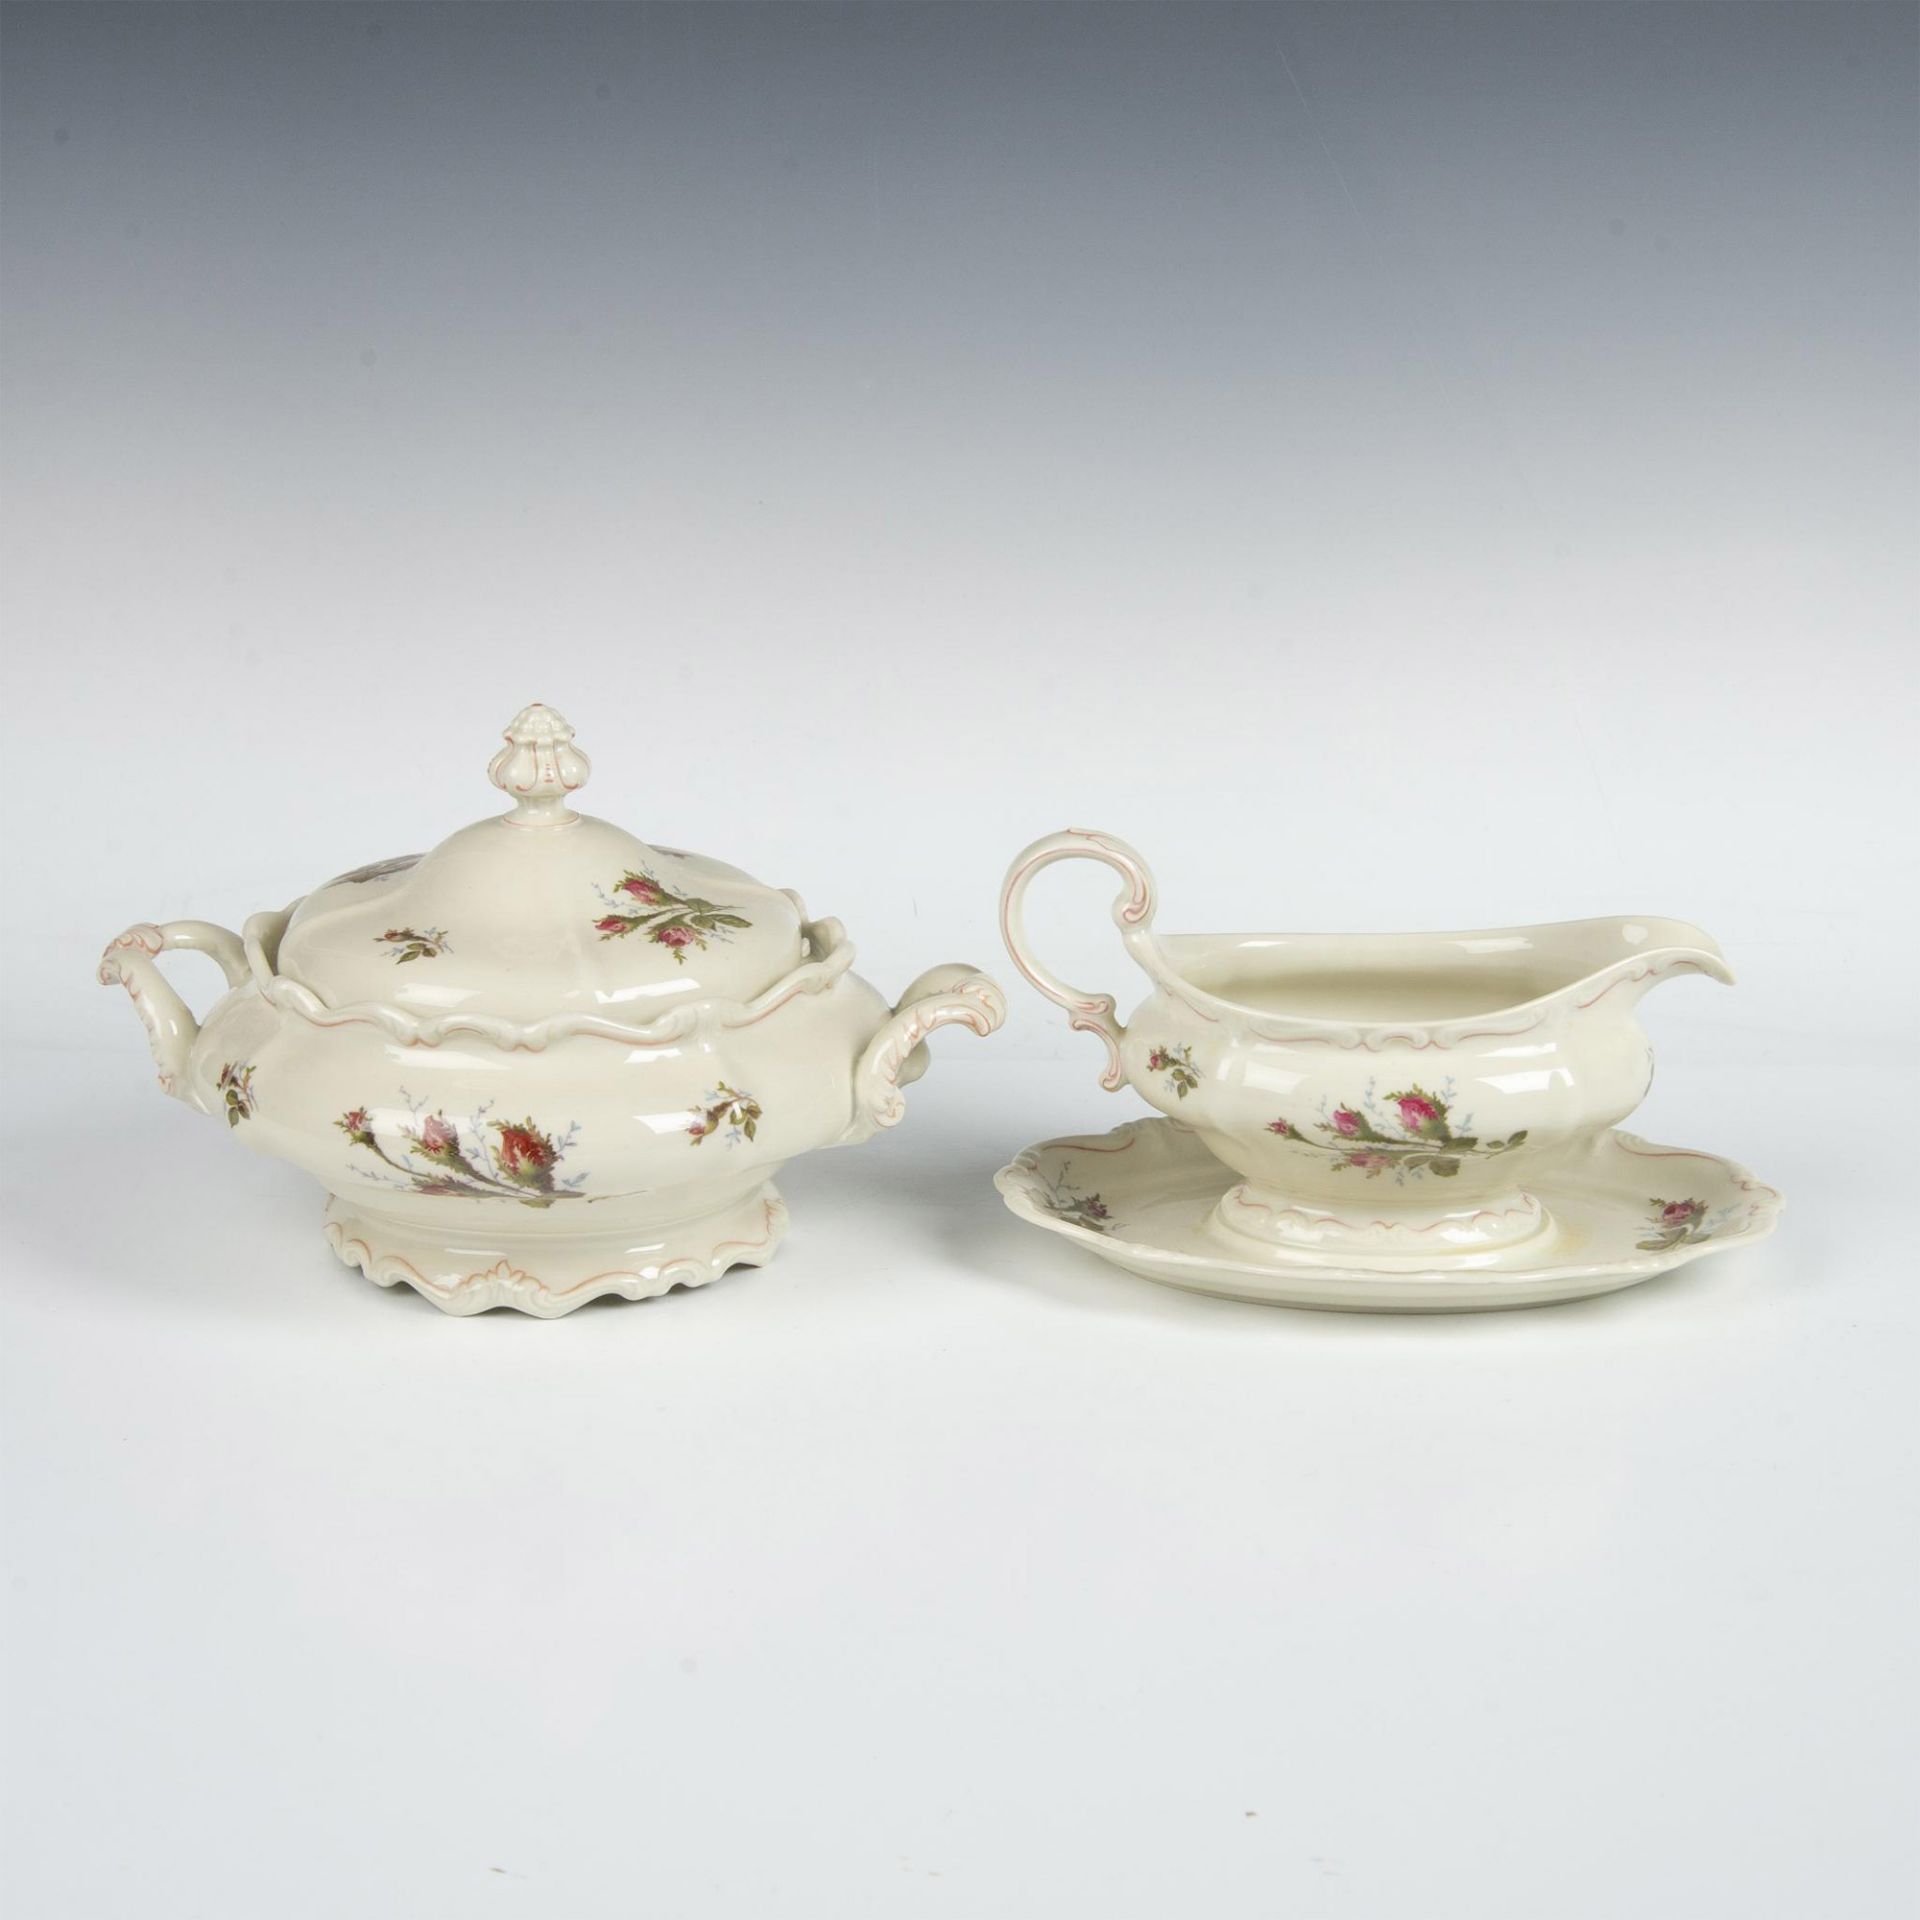 Rosenthal Pompadour Moss Rose Gravy Boat and Tureen - Image 2 of 3